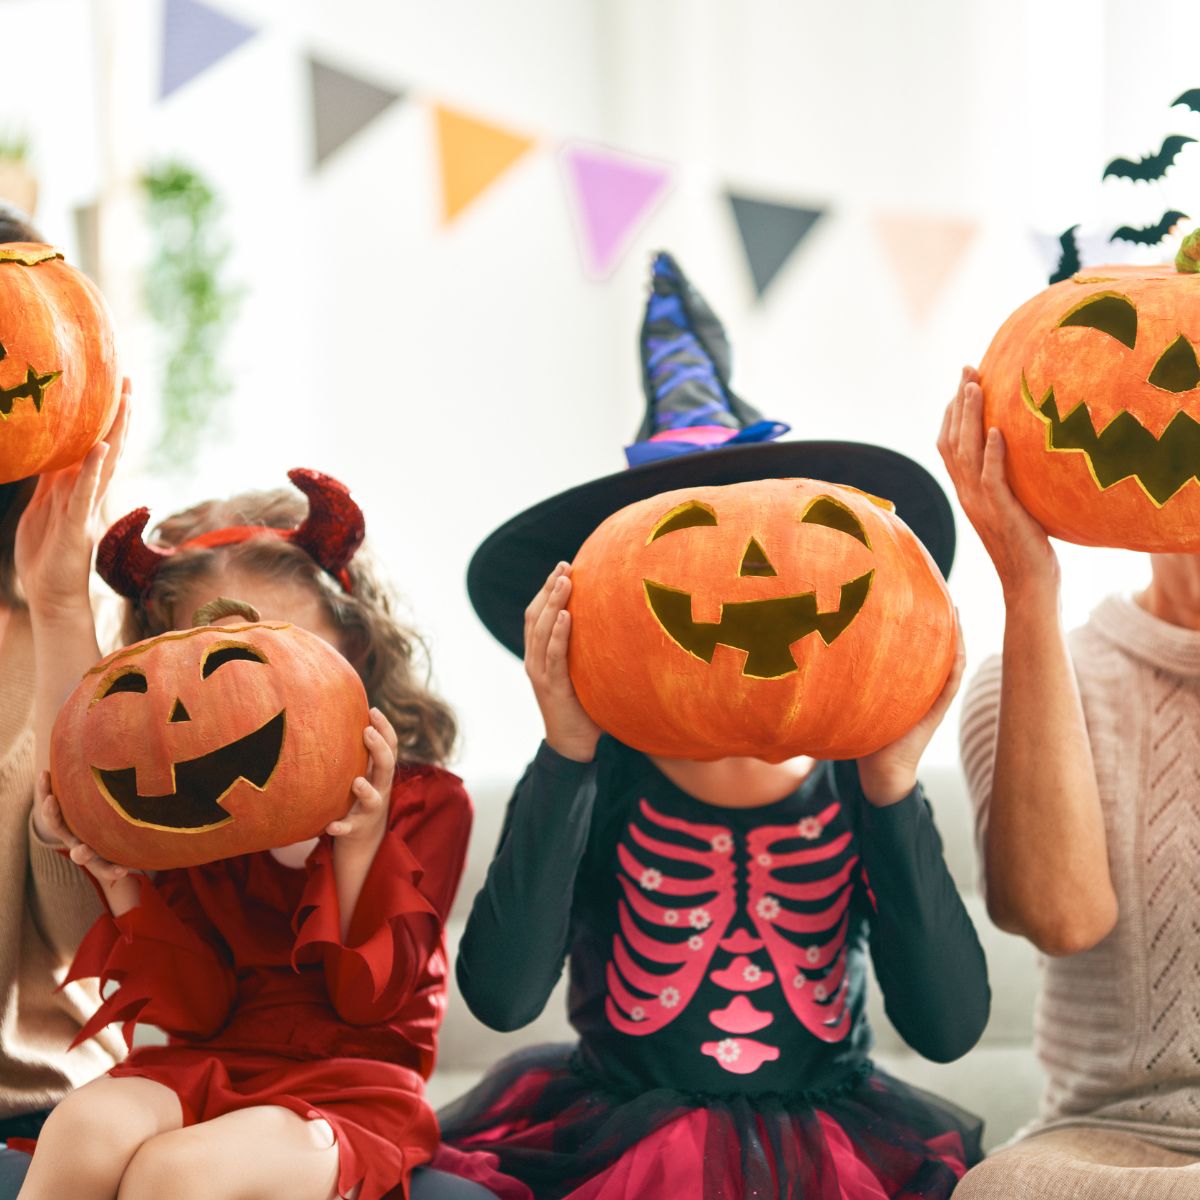 Kids in costumes at a Halloween party holding carved pumpkins in front of their faces.